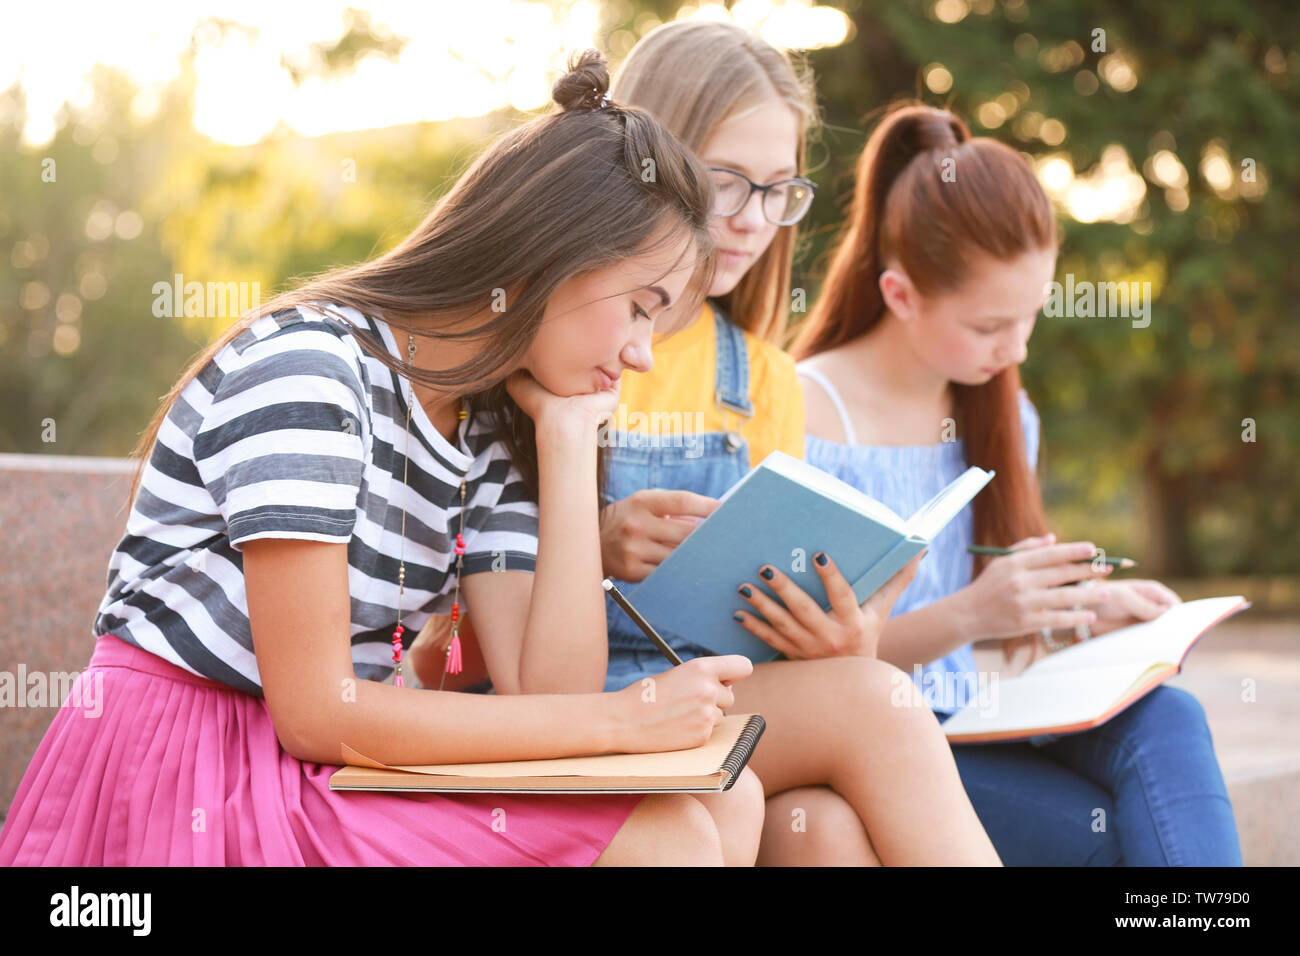 Cute teenagers spending time outdoors Stock Photo